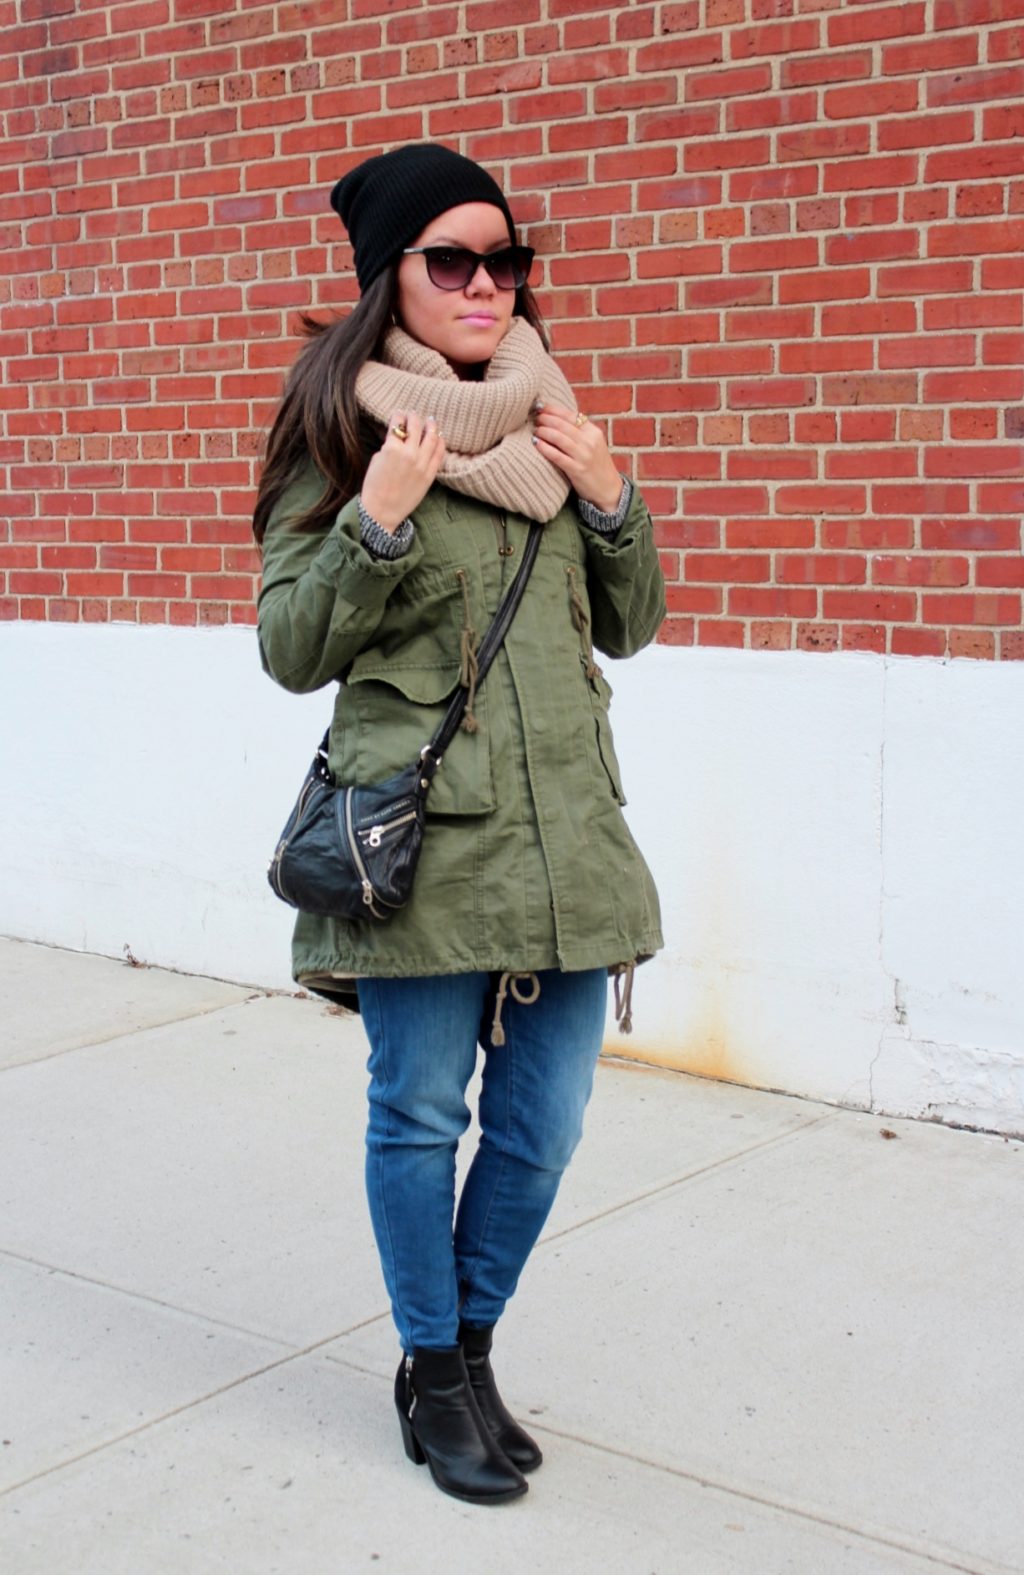 140+ Lovely Women's Outfit Ideas For Winter